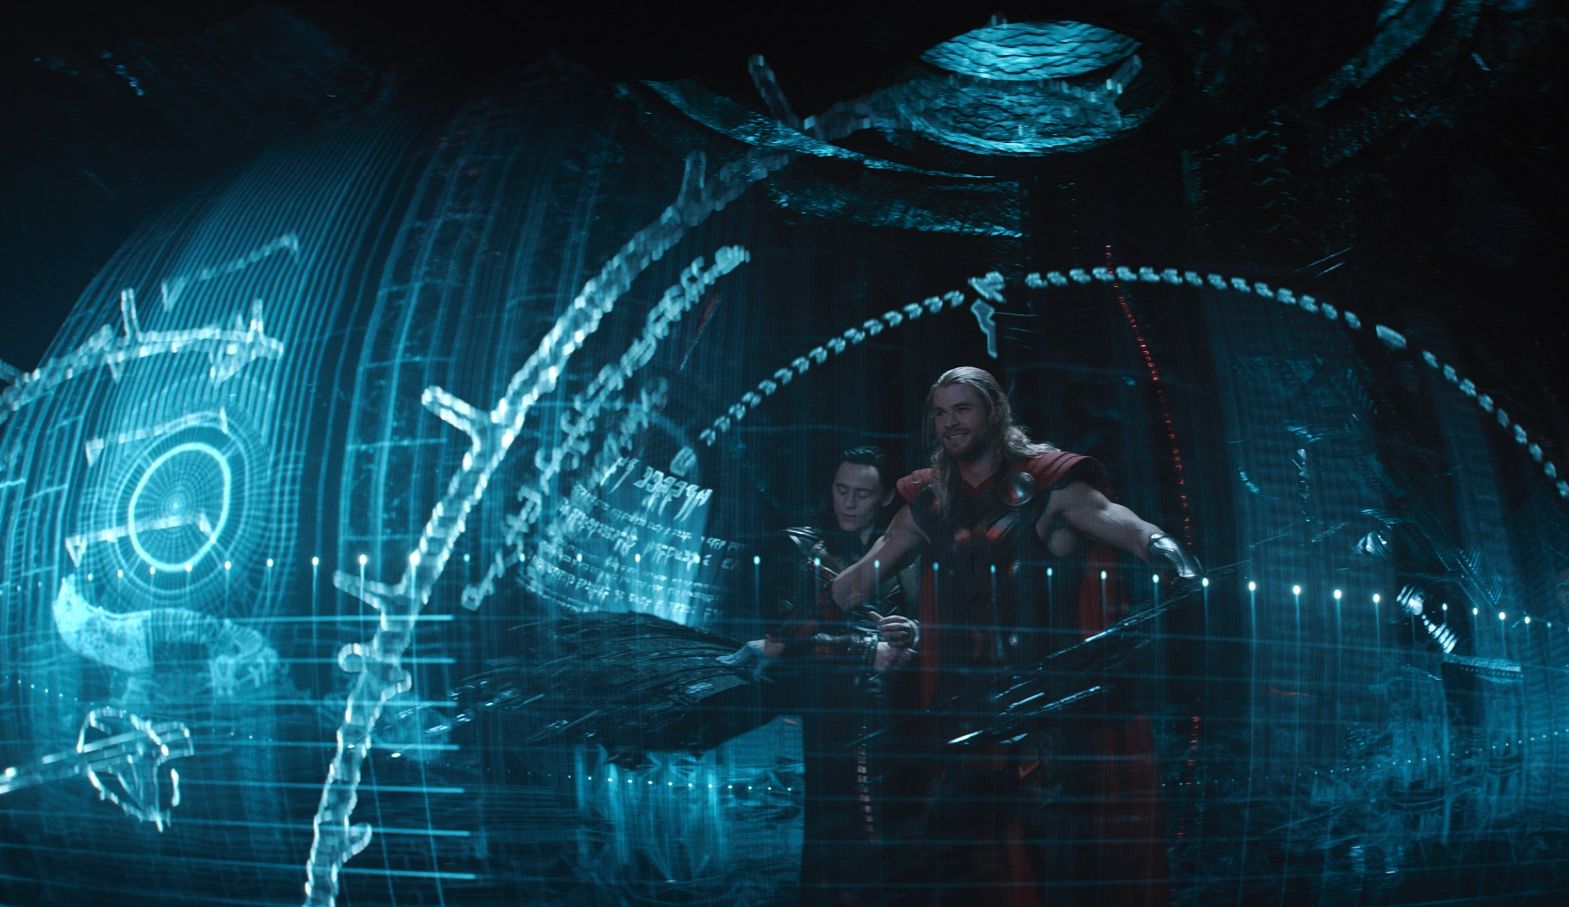 Thor and Loki fly around in futuristic blue ship thingy